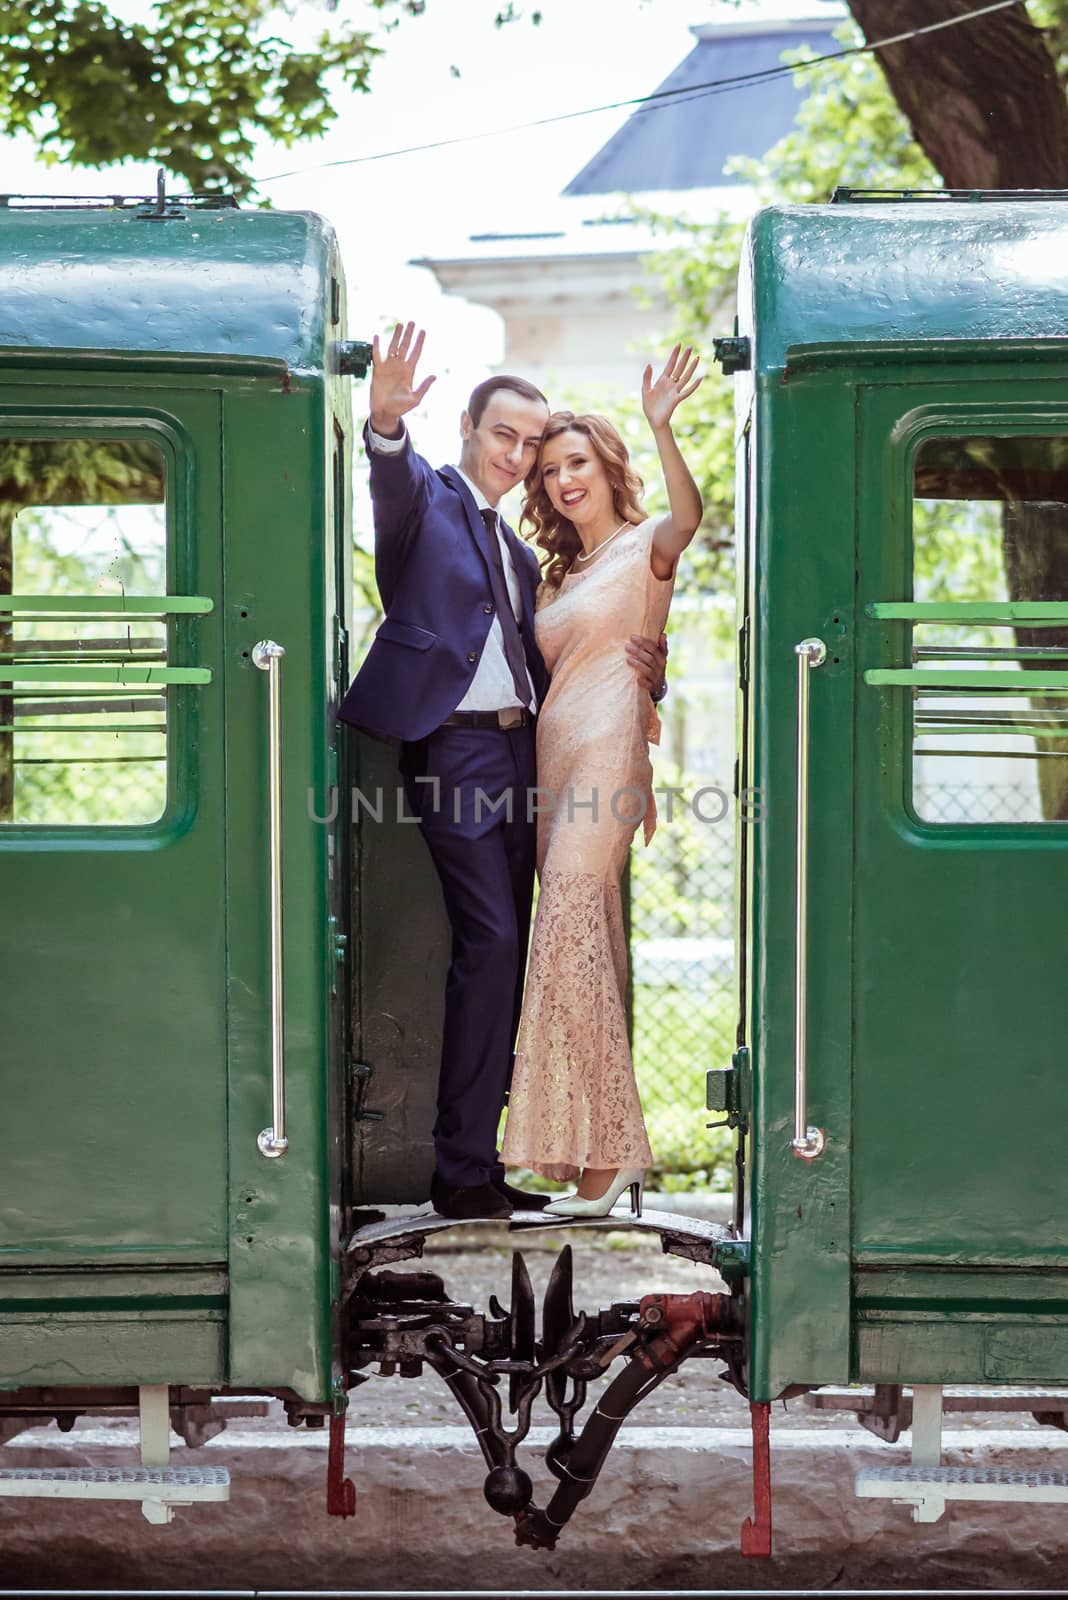 Just married couple standing at the junction between by wagons in Lviv, Ukraine